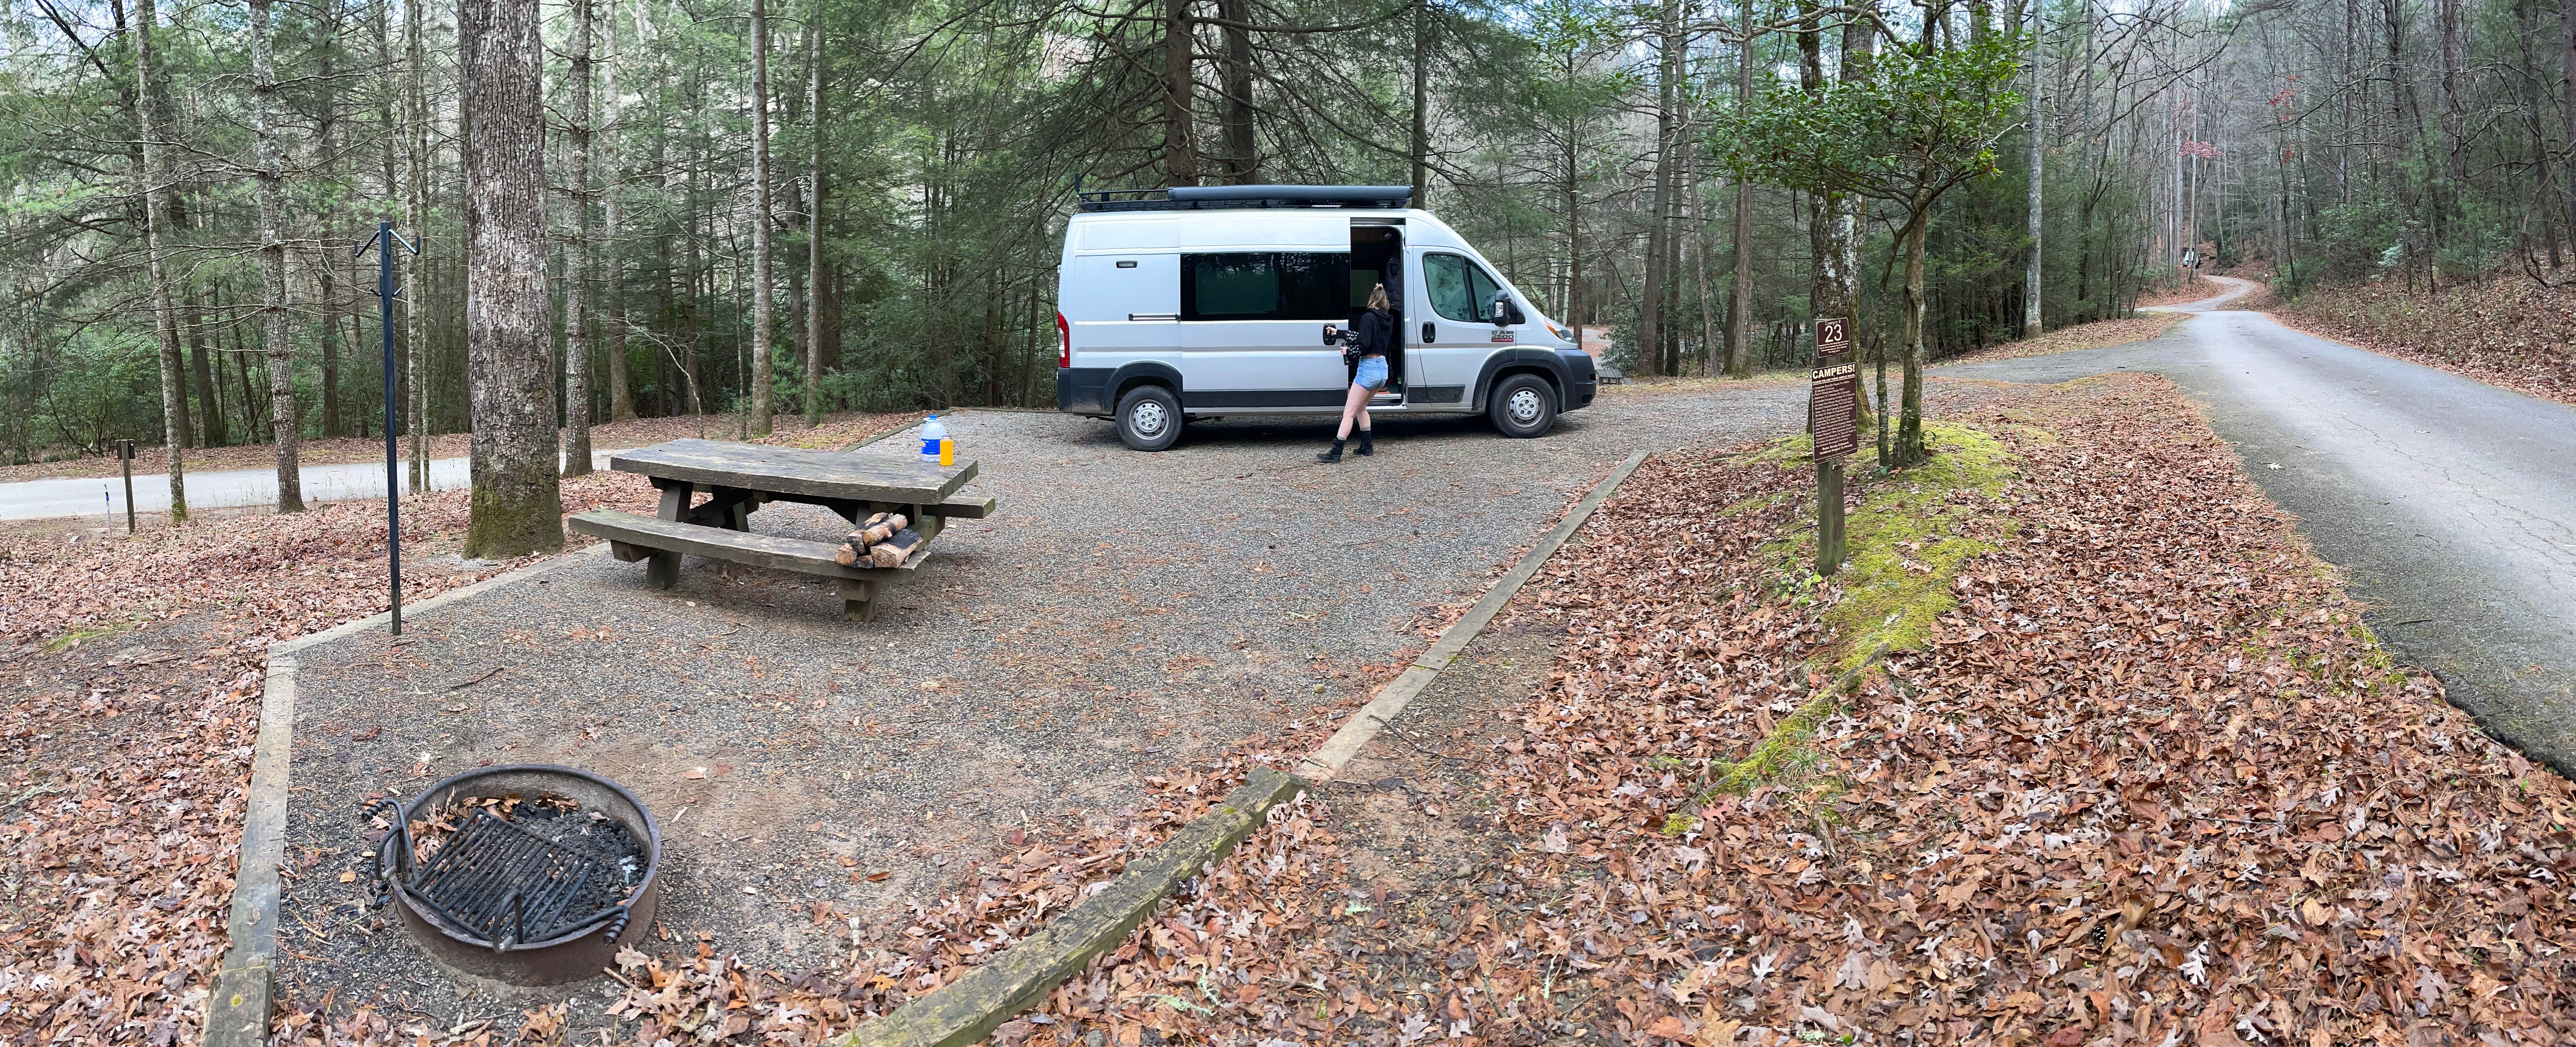 Camper submitted image from Chattahoochee National Forest Lake Winfield Scott Campground - 1